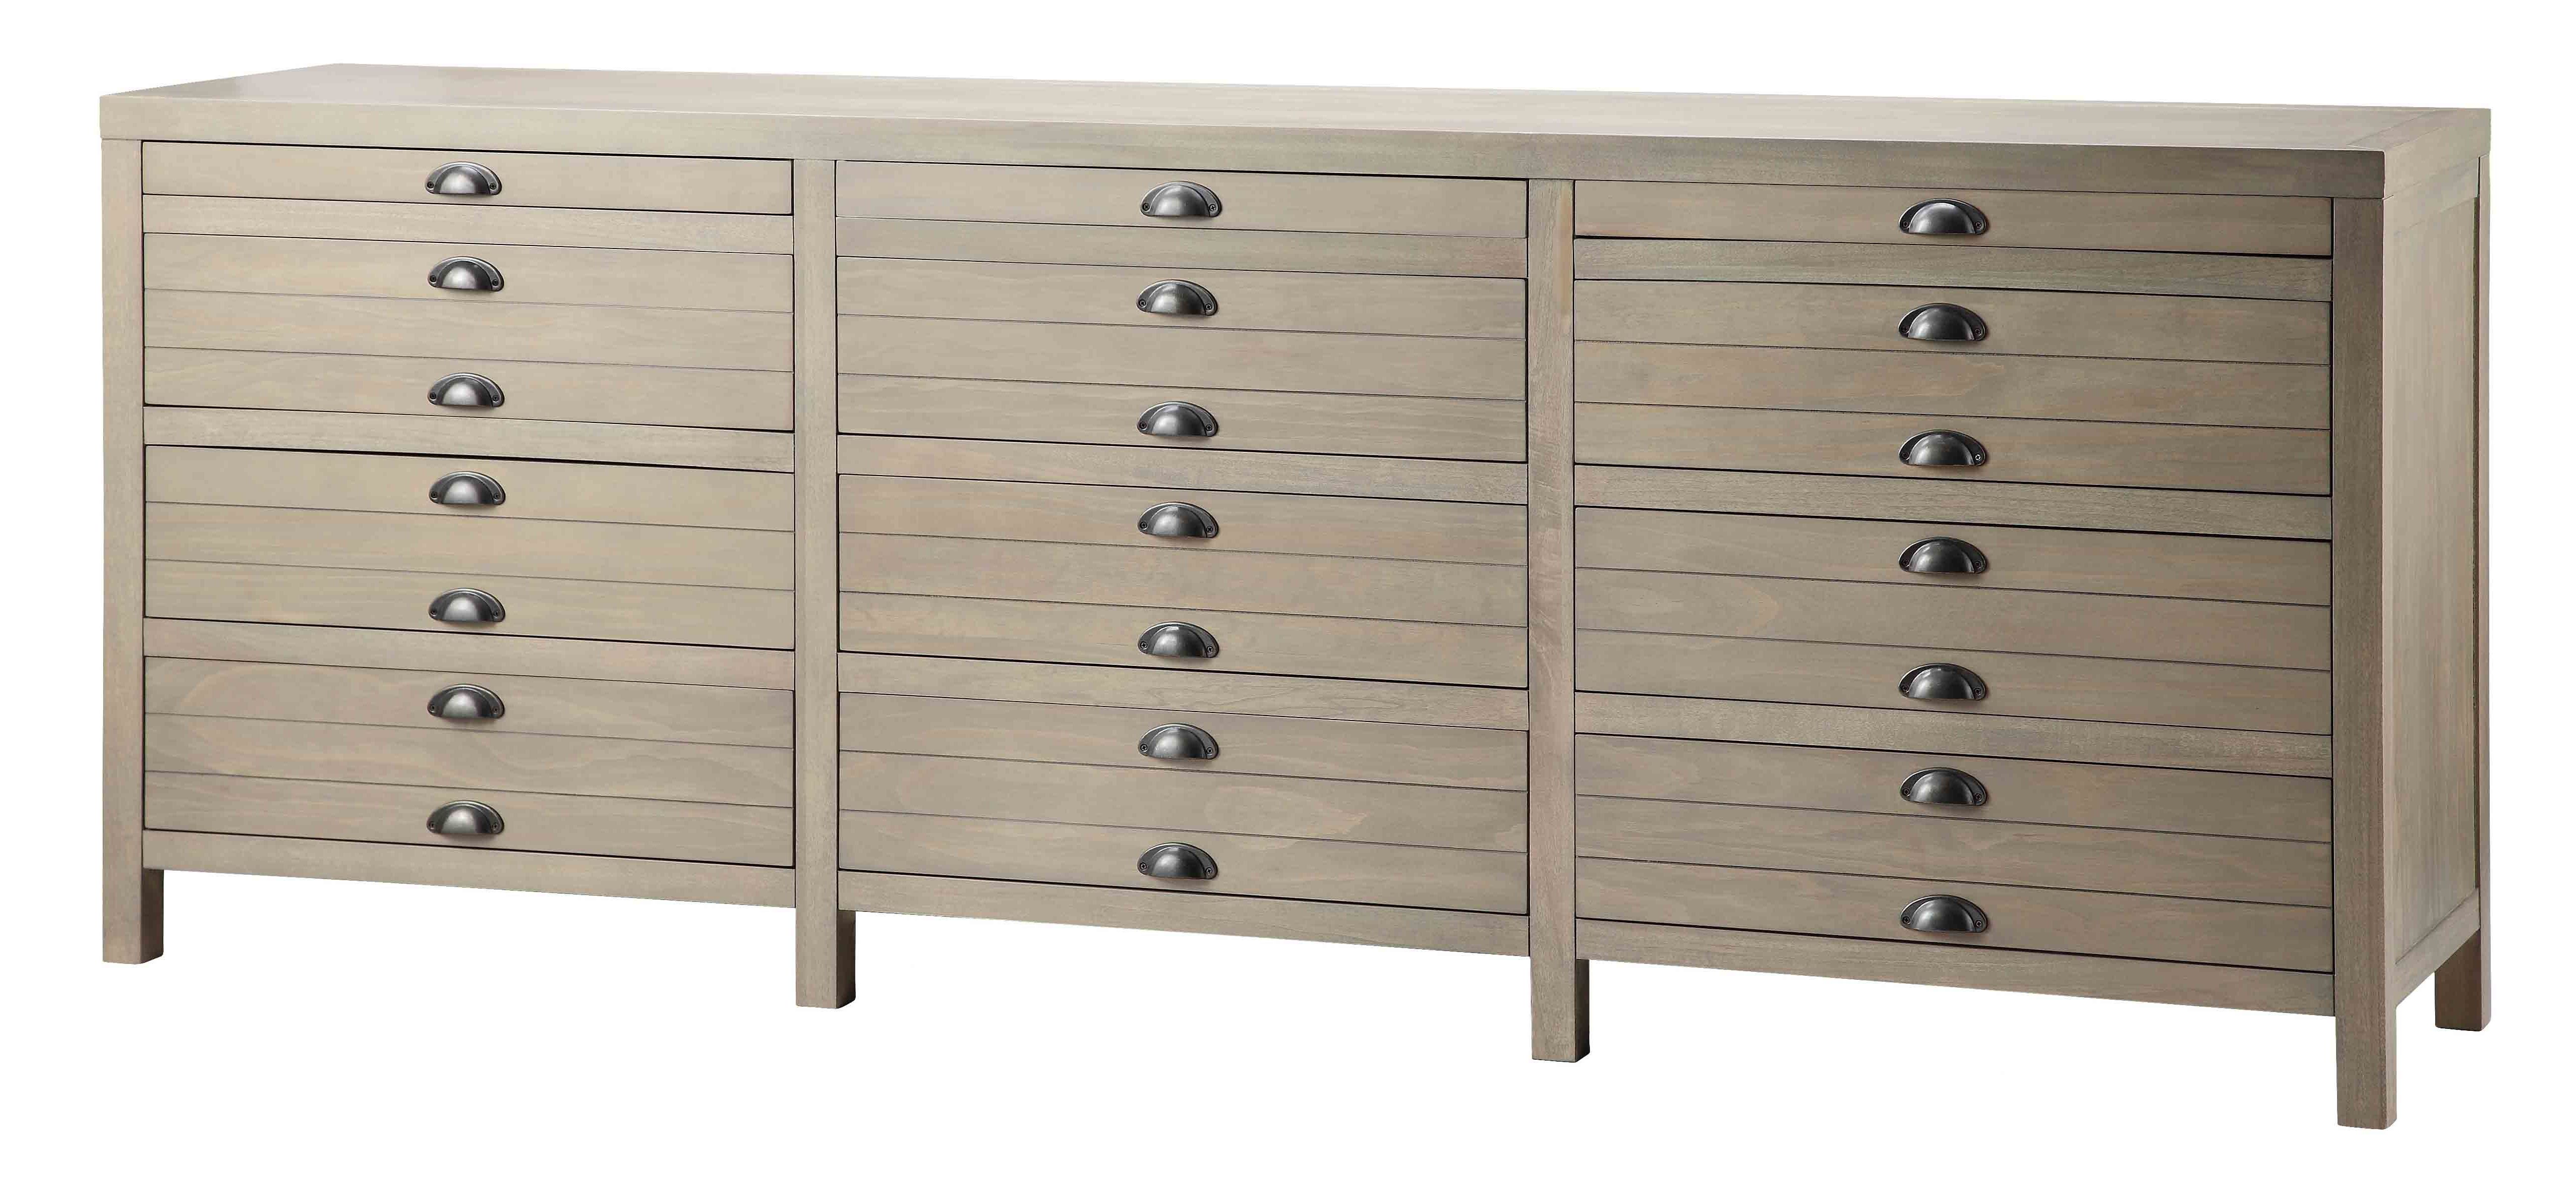 Amityville Wood Sideboard | Wayfair For Amityville Wood Sideboards (View 18 of 20)